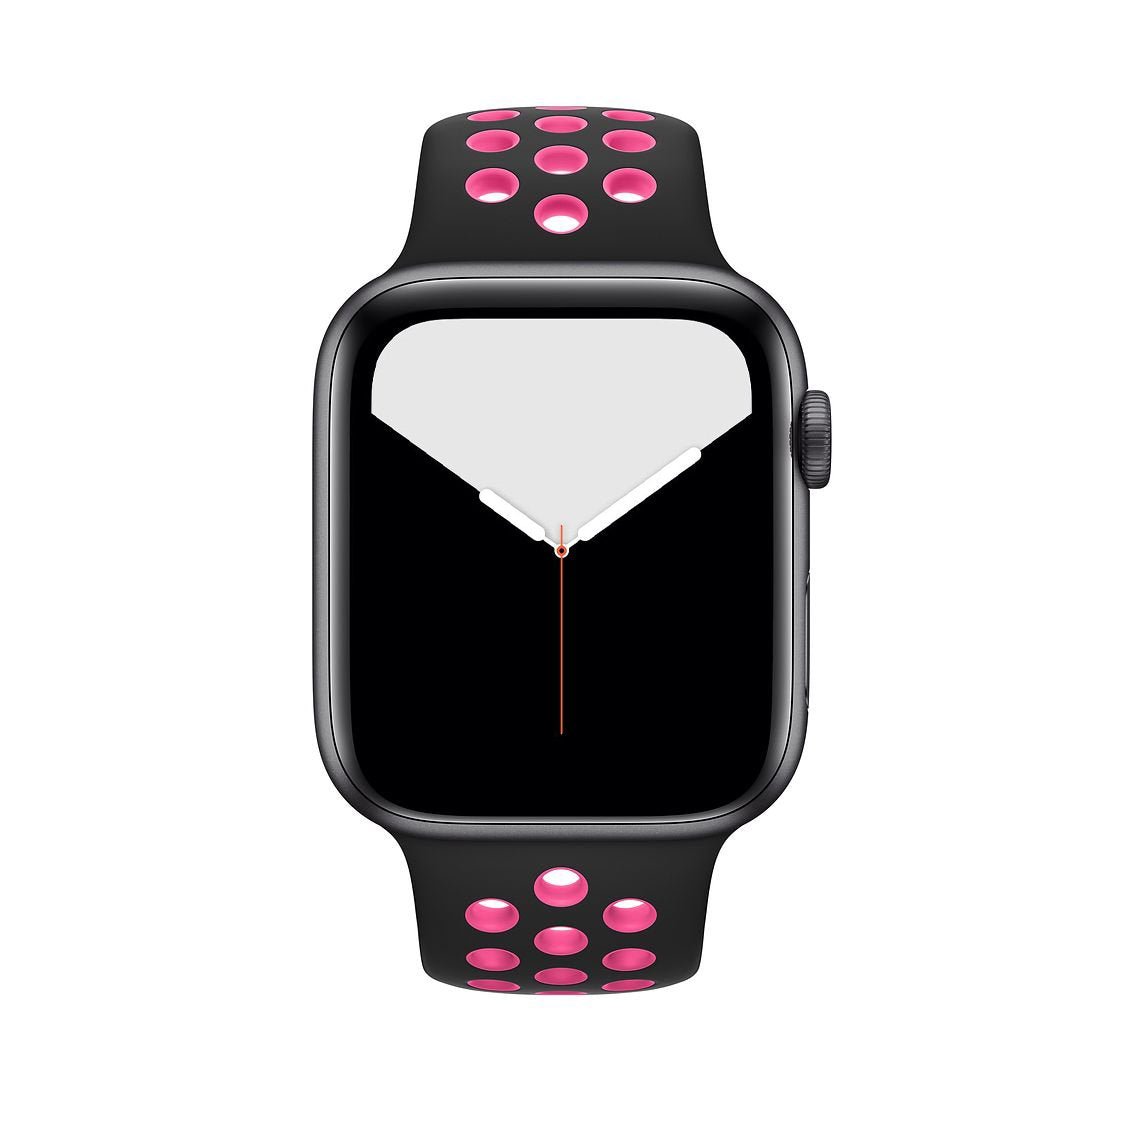 Black/Pink Blast Silicone Sport Strap for Apple Watch Silicone Bands   Accessories Gifts UK